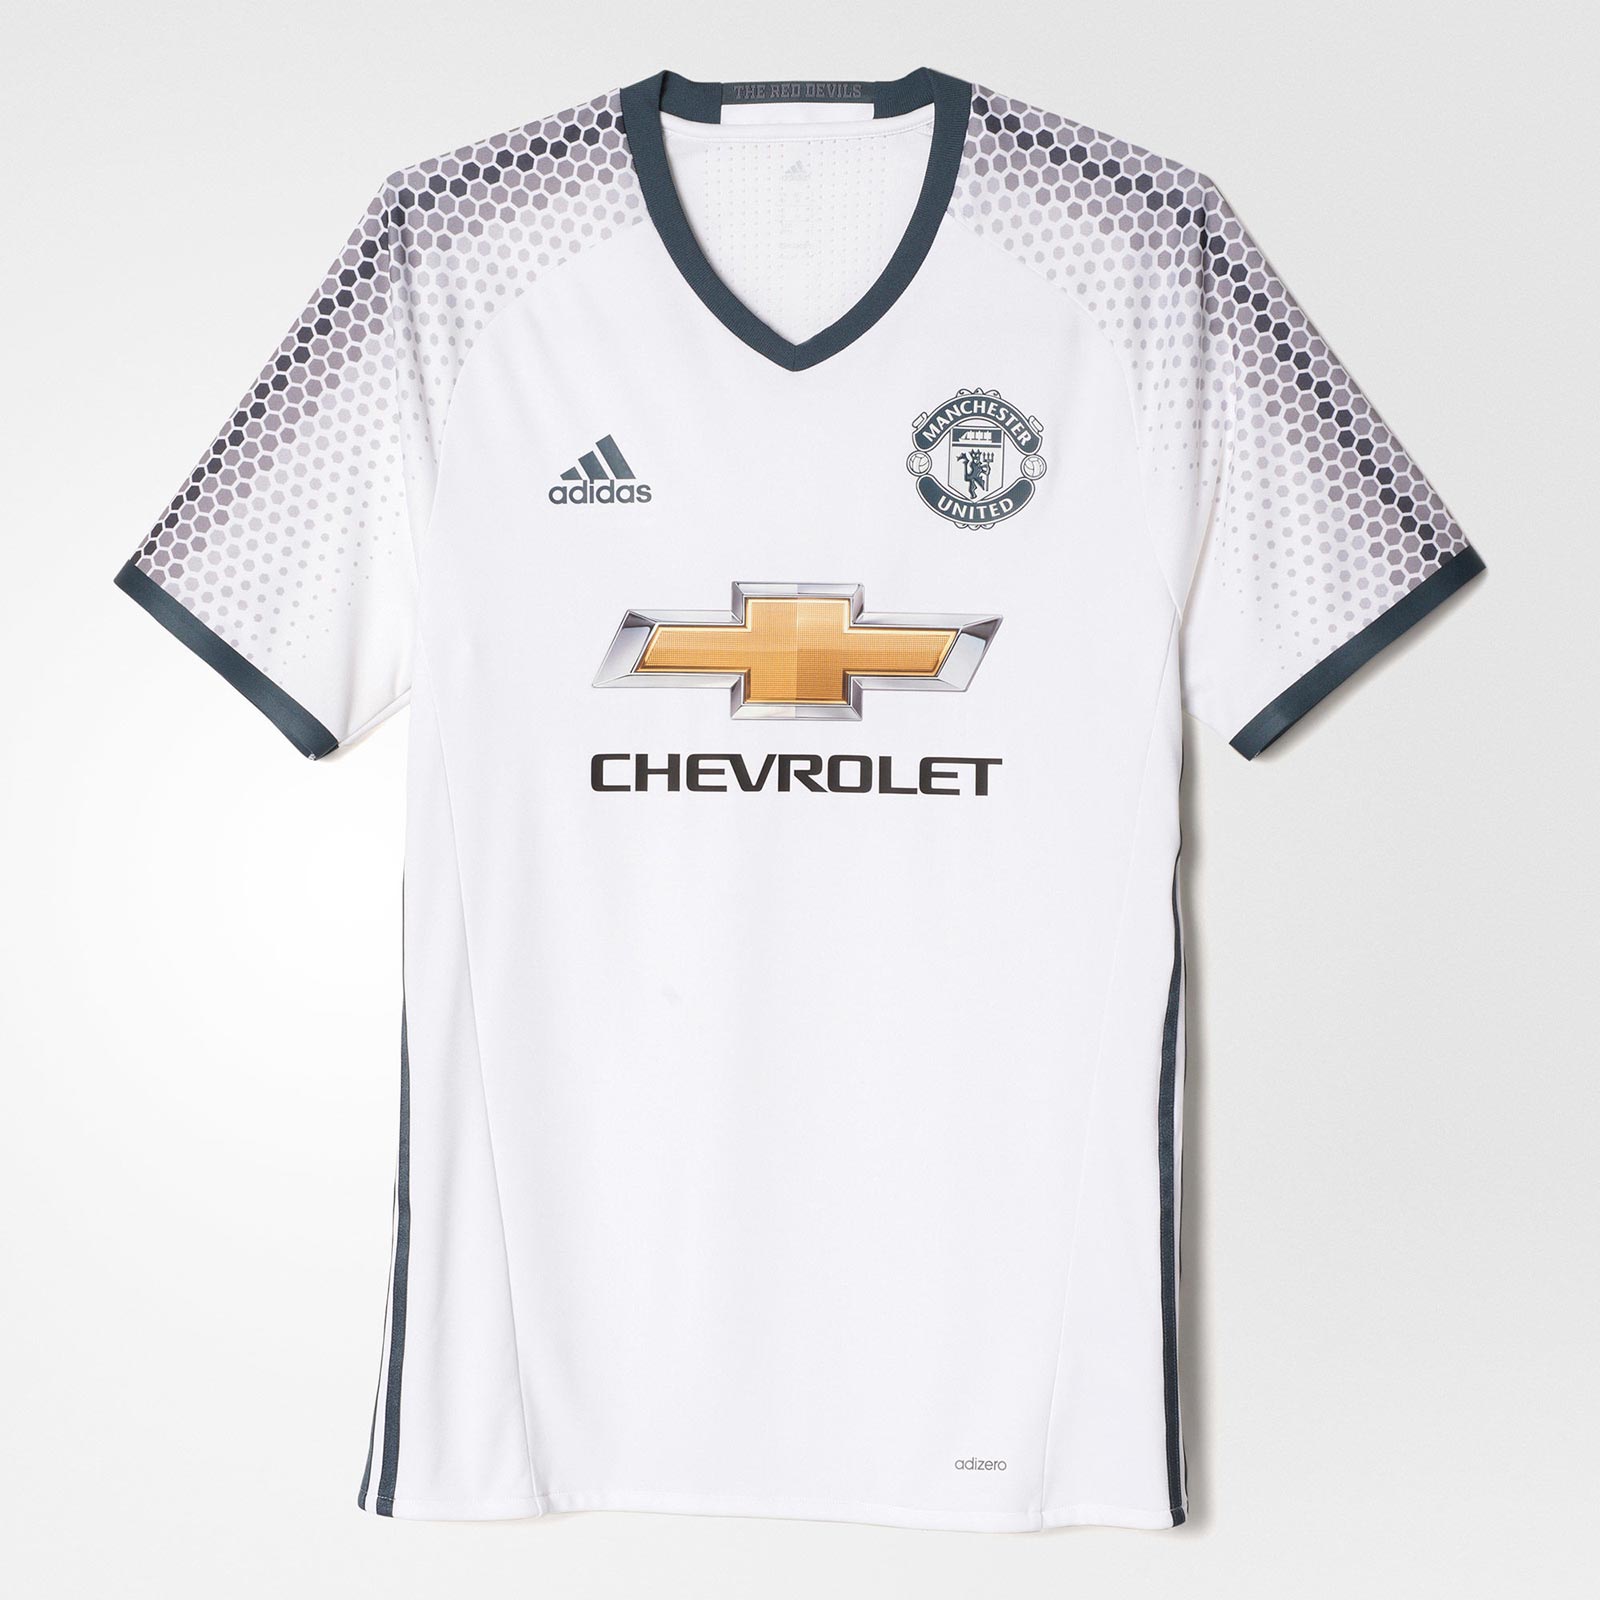 Manchester United 16-17 Home Kit Released - Footy Headlines